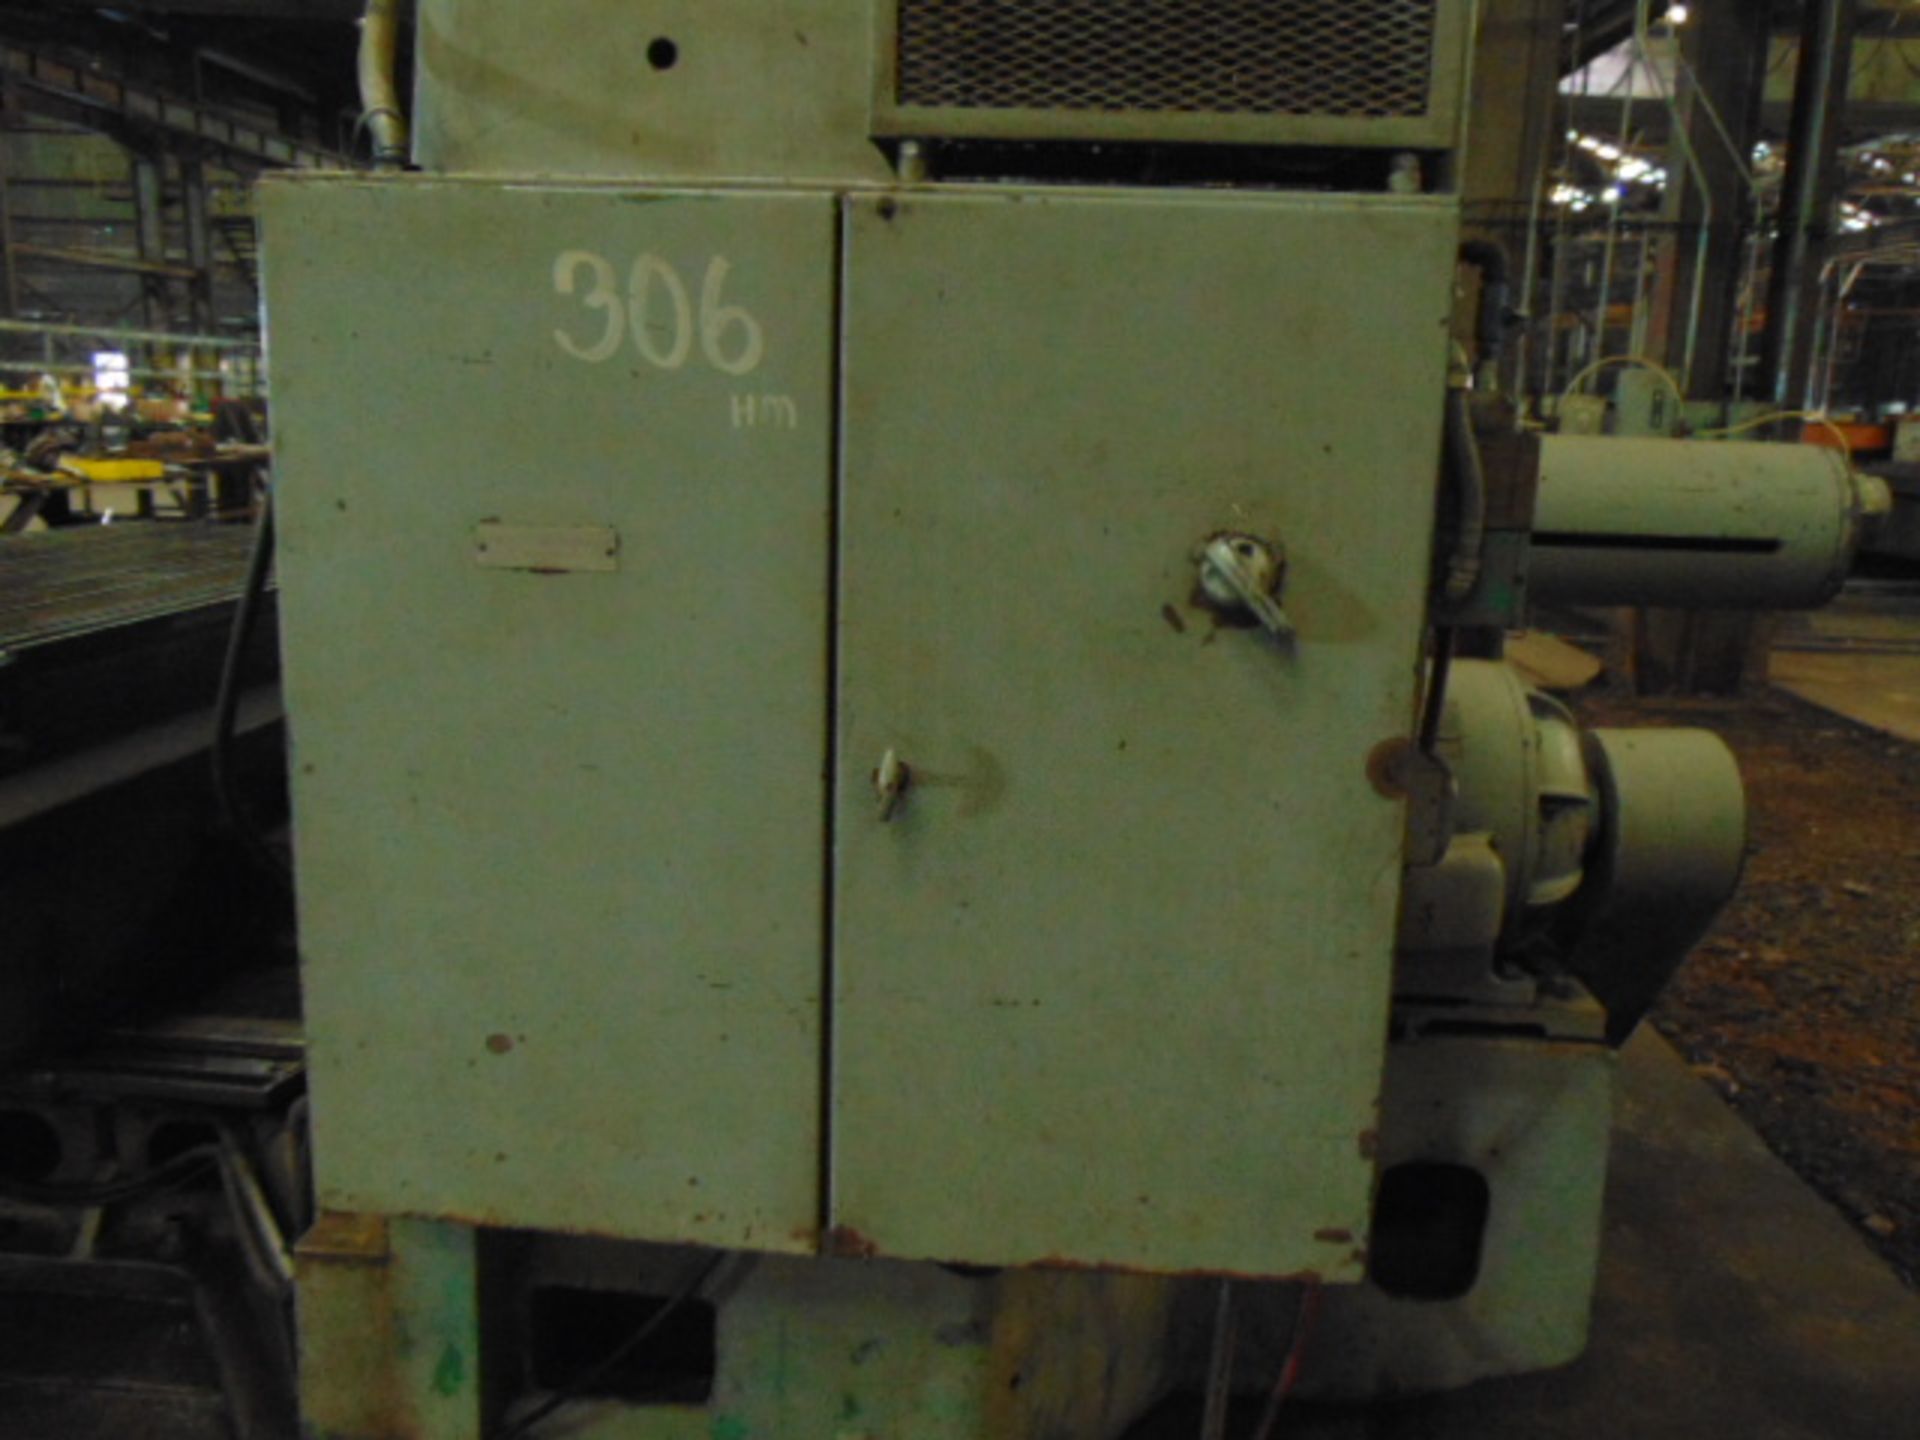 TABLE TYPE HORIZONTAL BORING MILL, LUCAS MDL. 428-60, 40" x 74" tbl., 60" cross travel, approx. - Image 12 of 16